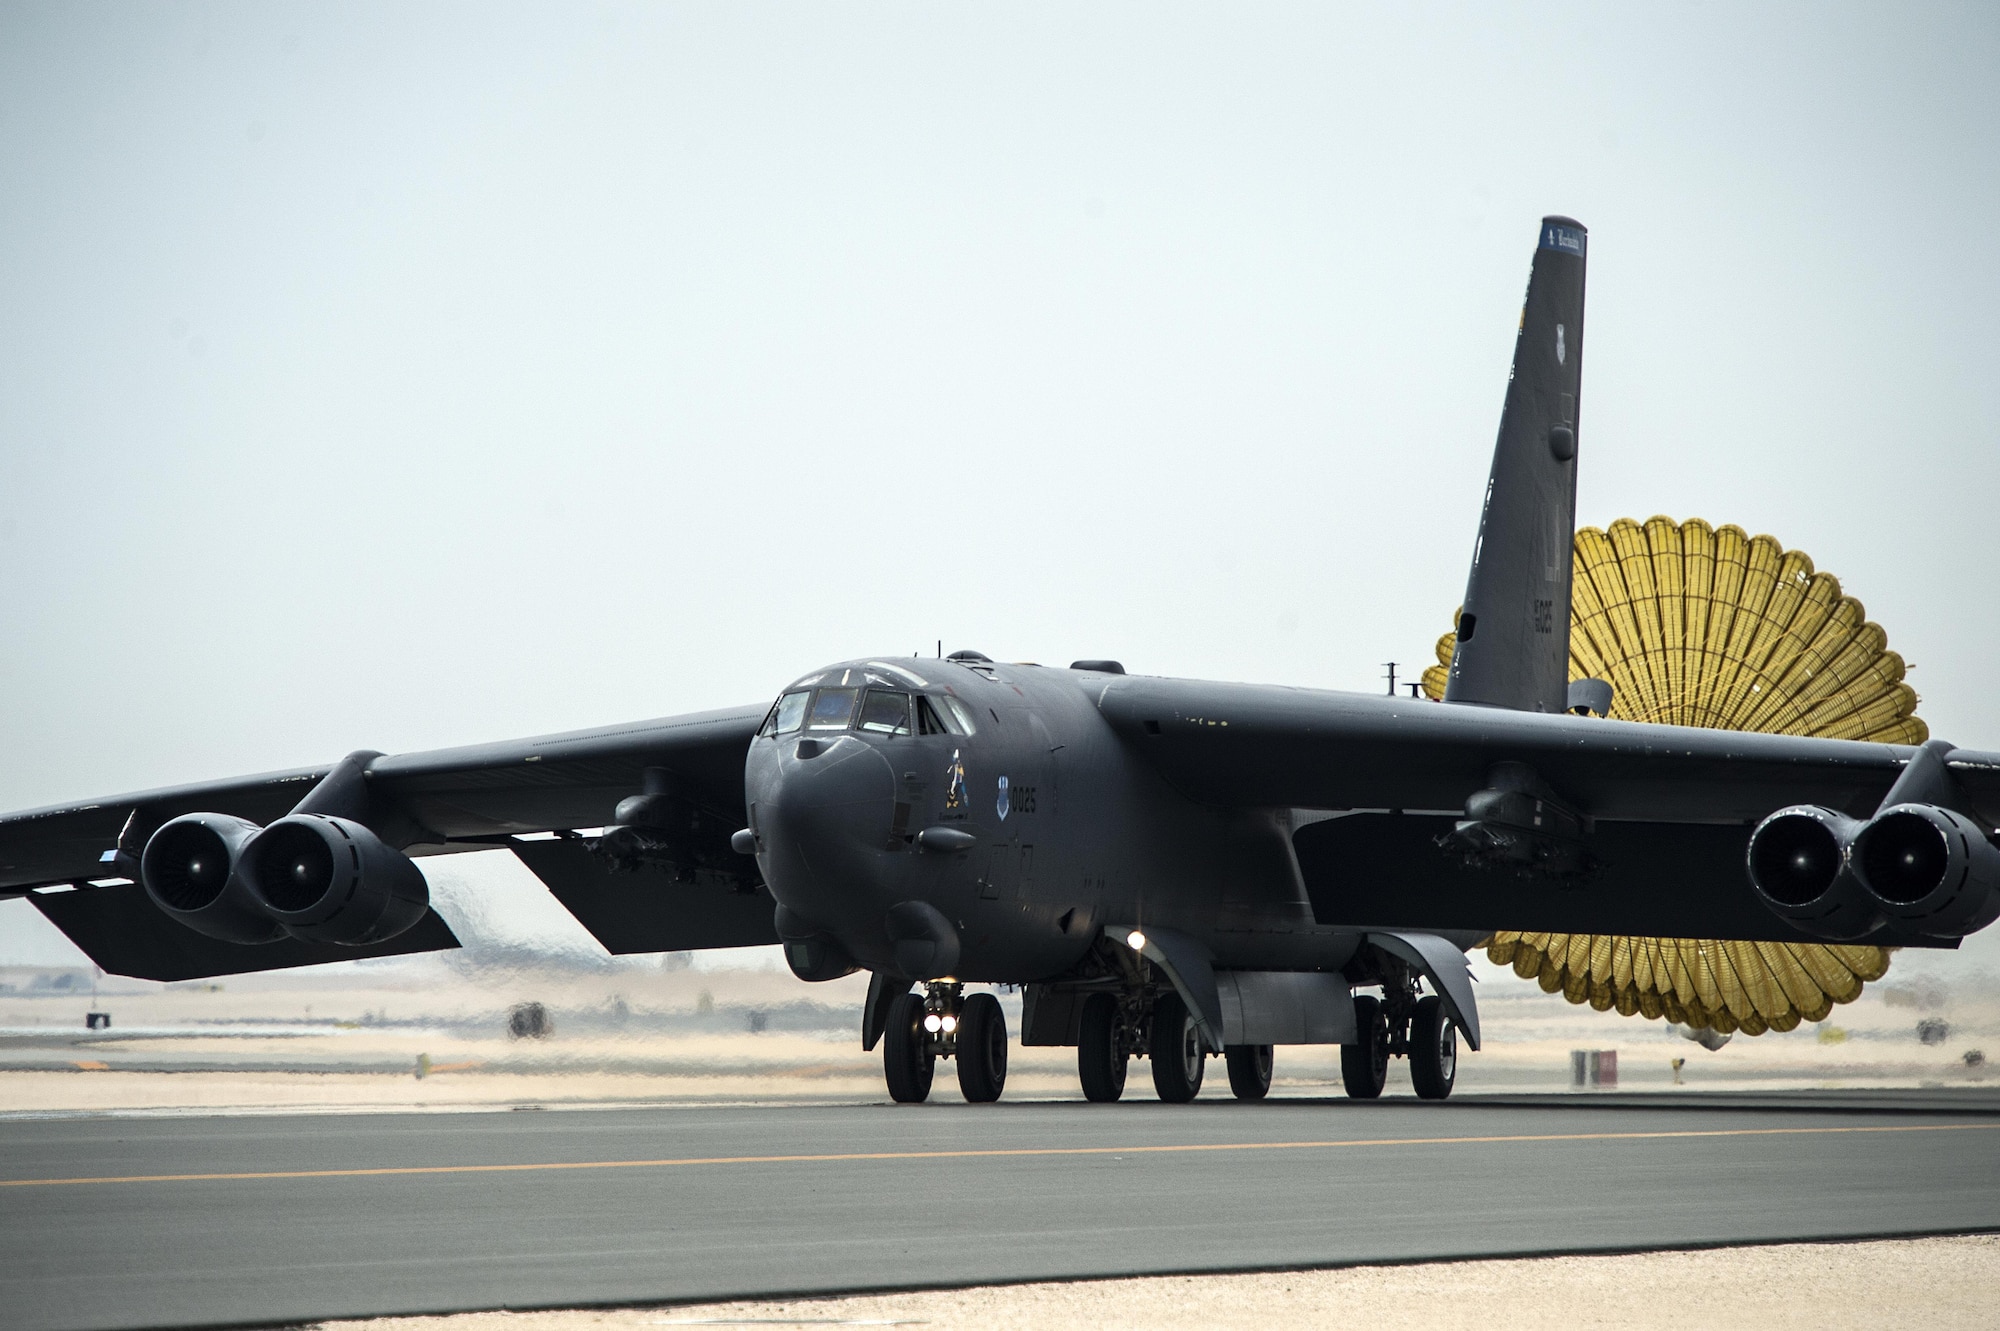 U.S. Air Force B-52 Stratofortress aircraft from Barksdale Air Force Base, La., arrived at Al Udeid Air Base, Qatar, April 9, 2016 in support of Operation Inherent Resolve, the operation to eliminate the Islamic State of Iraq and the Levant and the threat they pose to Iraq, Syria and the wider international community, and as needed in the region. The B-52 offers diverse capabilities including the delivery of precision weapons. (U.S. Air Force photo/Tech. Sgt. Nathan Lipscomb)